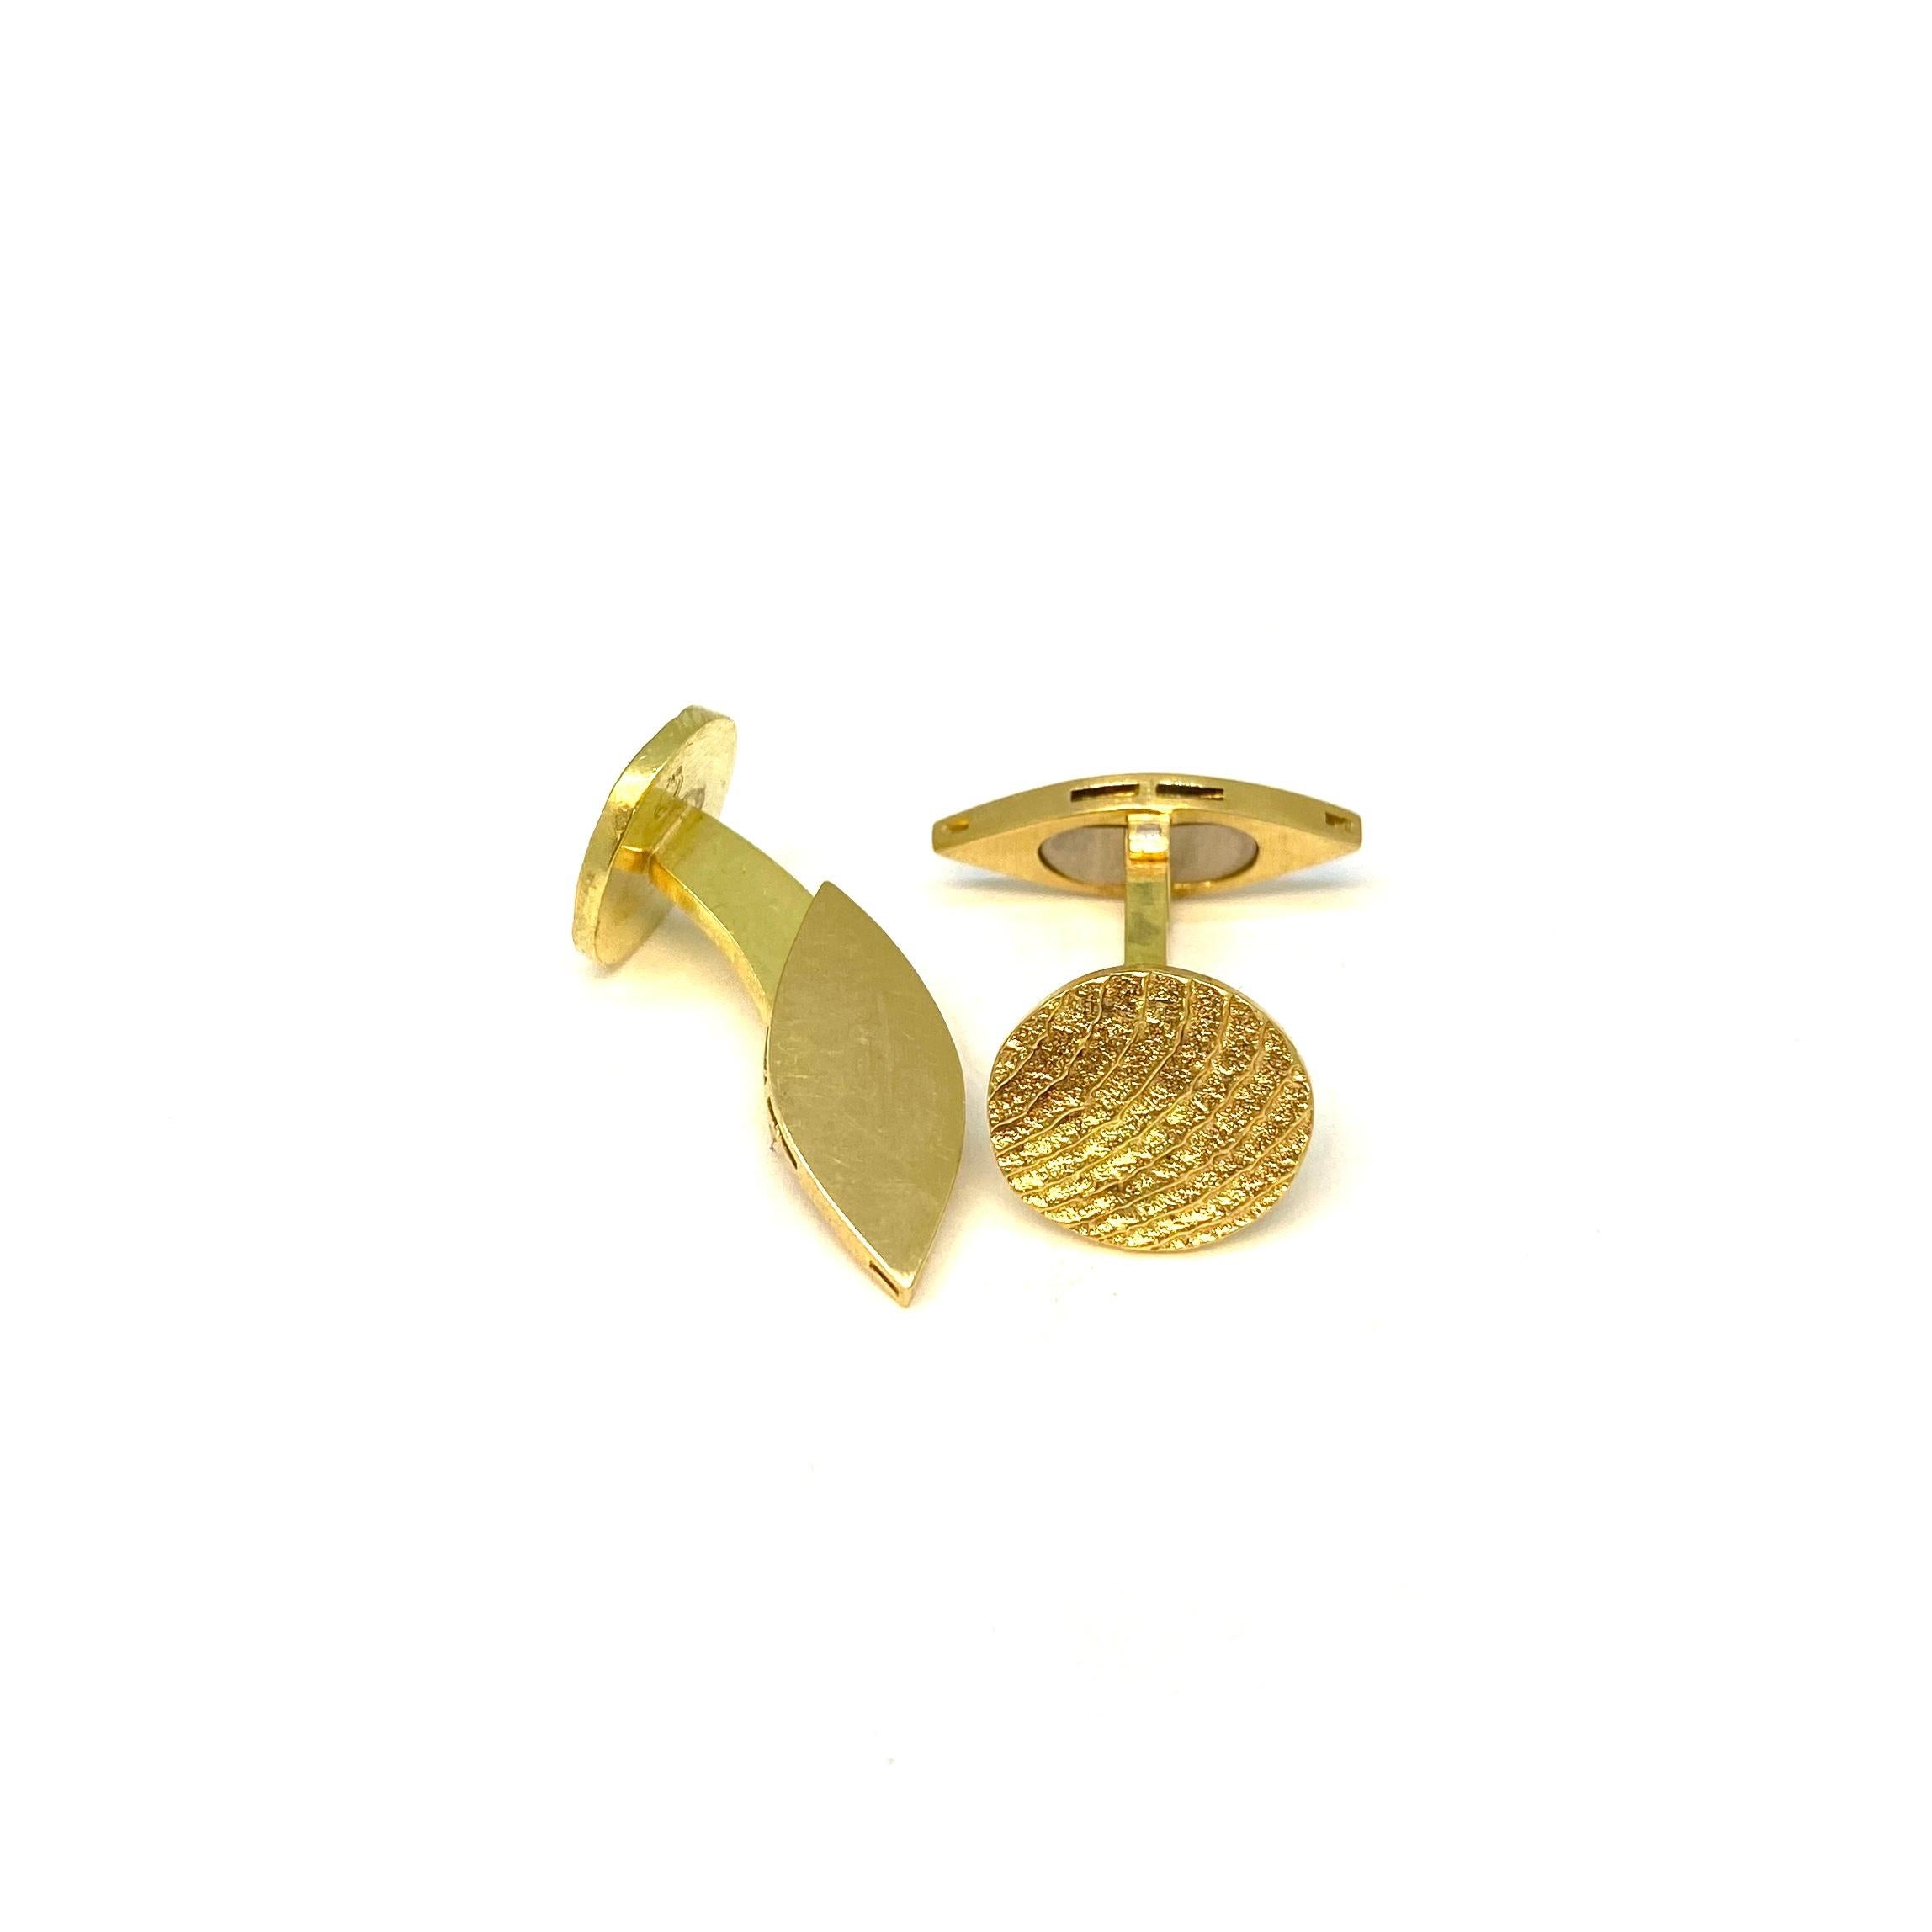 Introducing Lesunja's exclusive line of yellow gold cufflinks, meticulously designed for the discerning gentleman. The epitome of elegance and refinement, our cufflinks perfectly complement any suit, adding a touch of sophistication that few